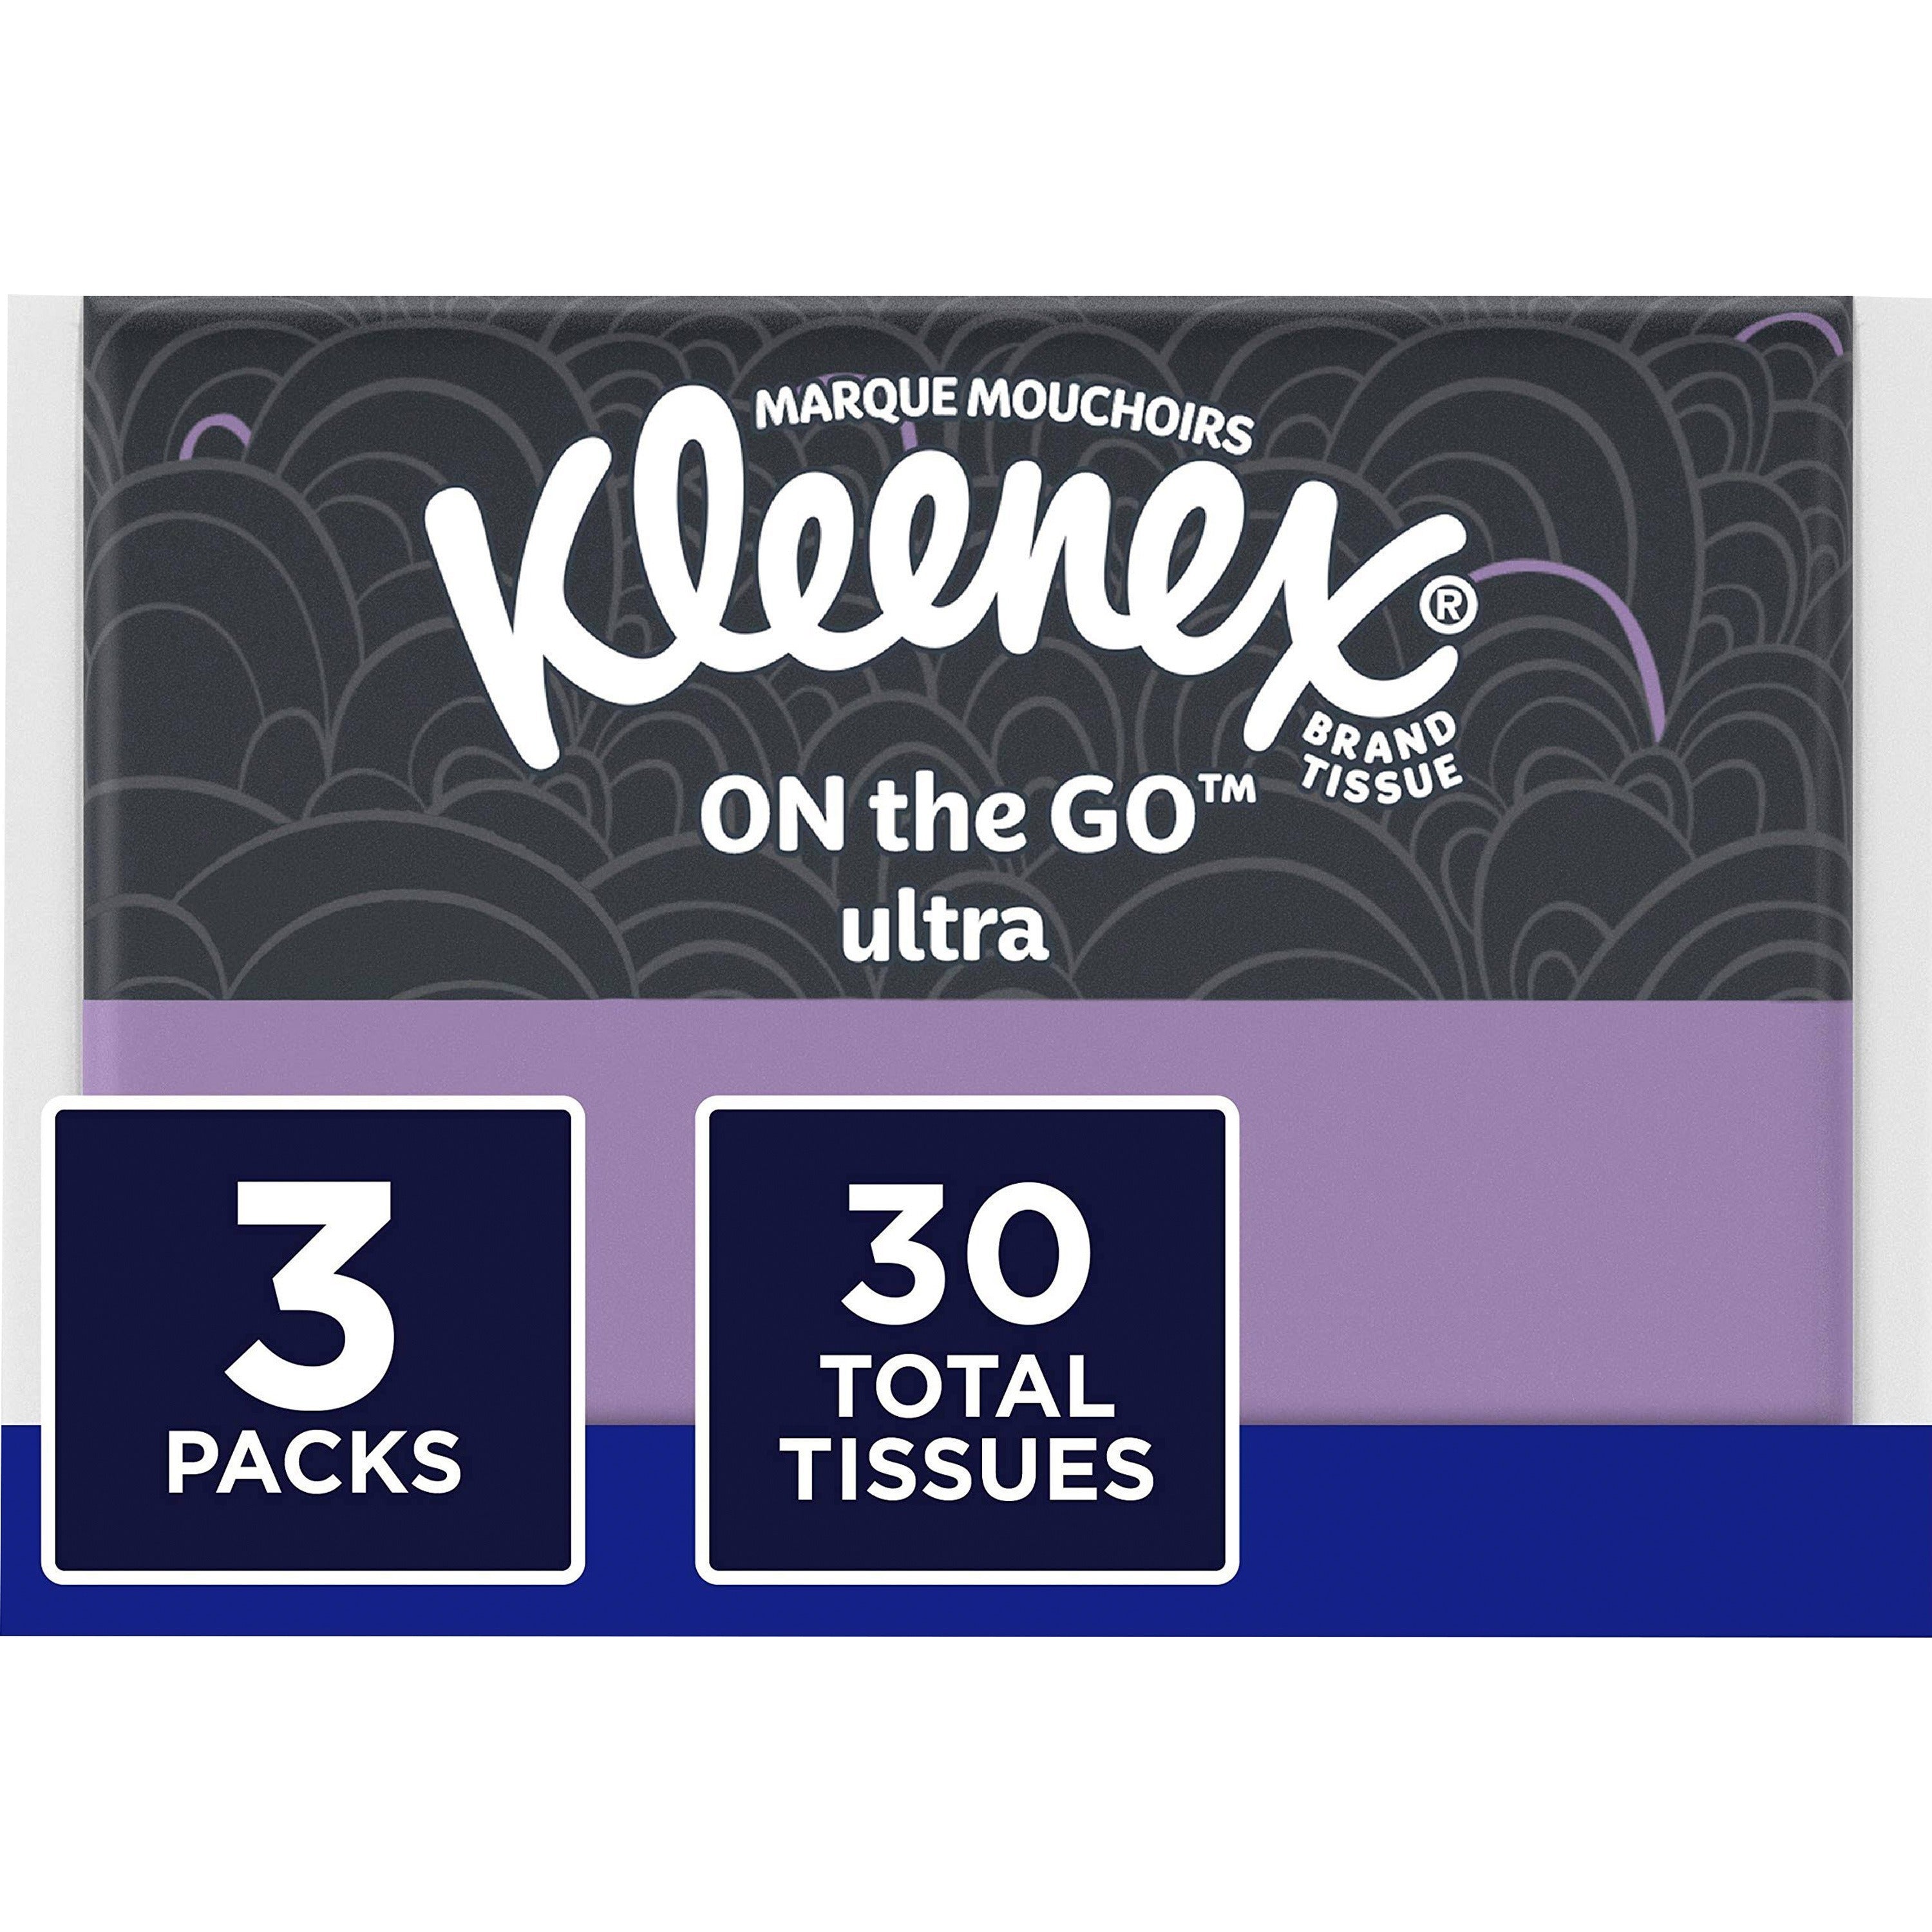 kleenex-on-the-go-slim-wallet-pack-30-facial-tissue-count-3-ply-white-soft-durable-thick-absorbent-strong-moisture-resistant-portable-disposable-eco-friendly-comfortable-fragrance-free-1-each_kcc35533 - 2